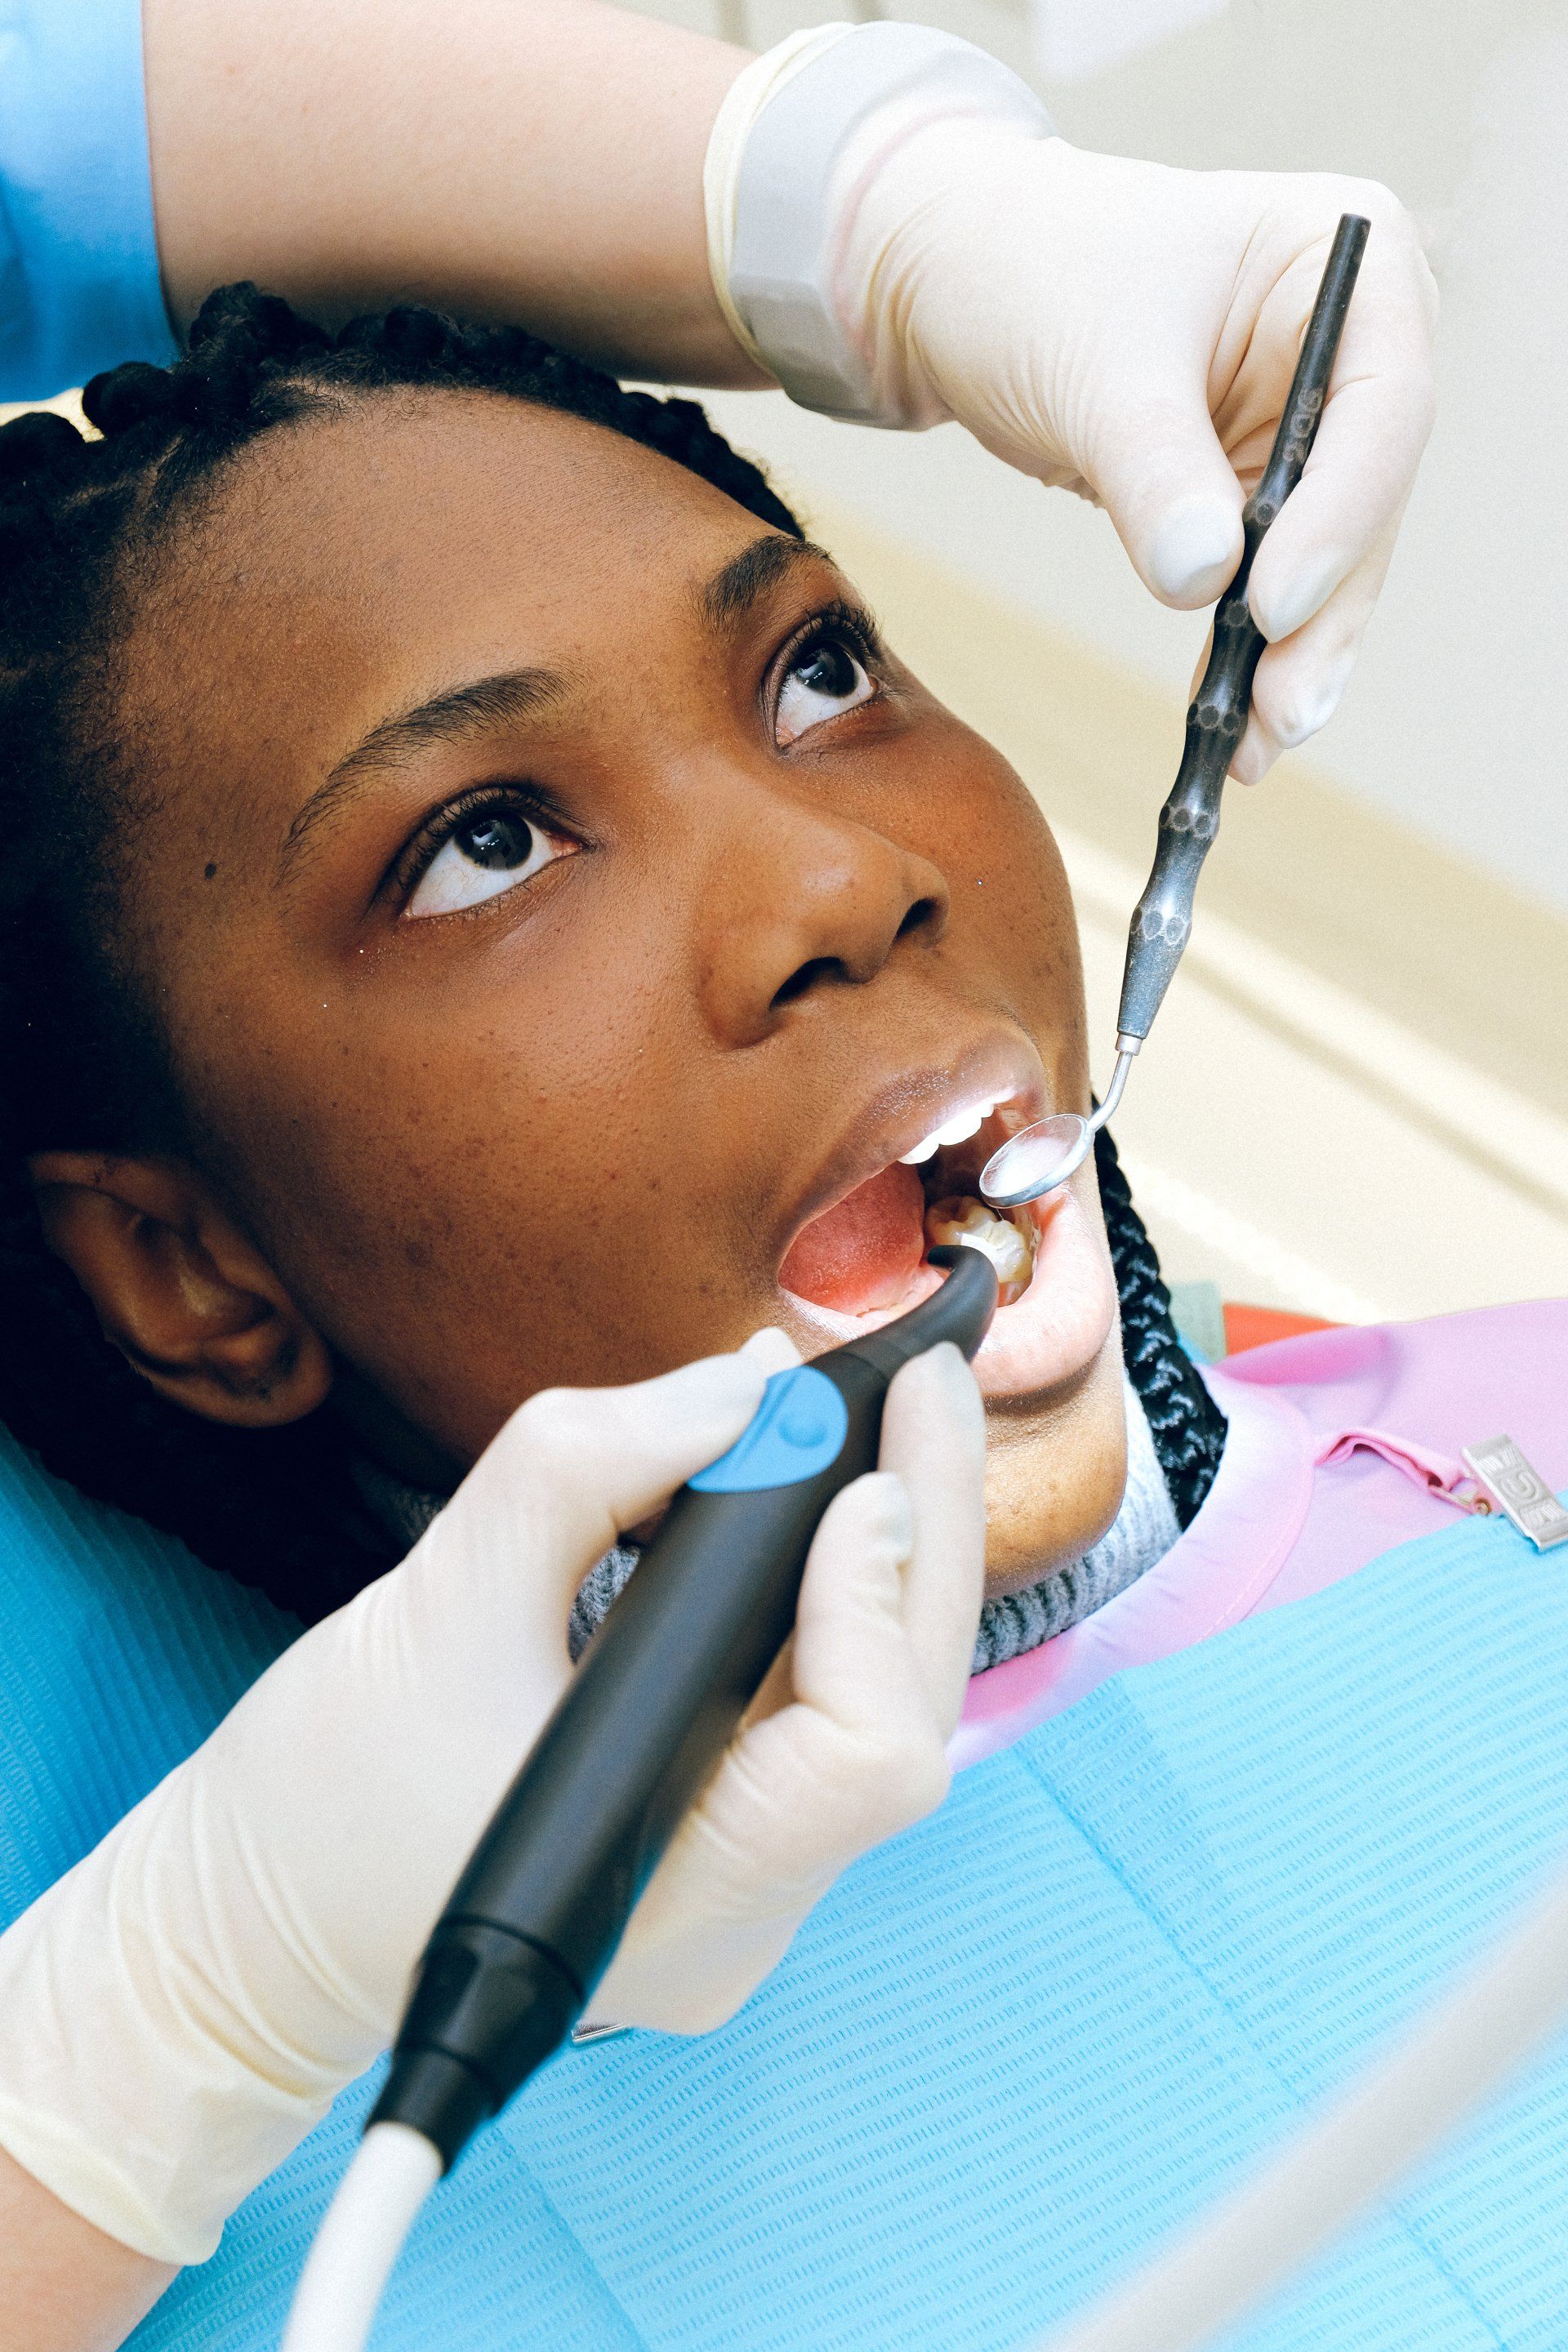 When to Consider a Dental “Crowning”